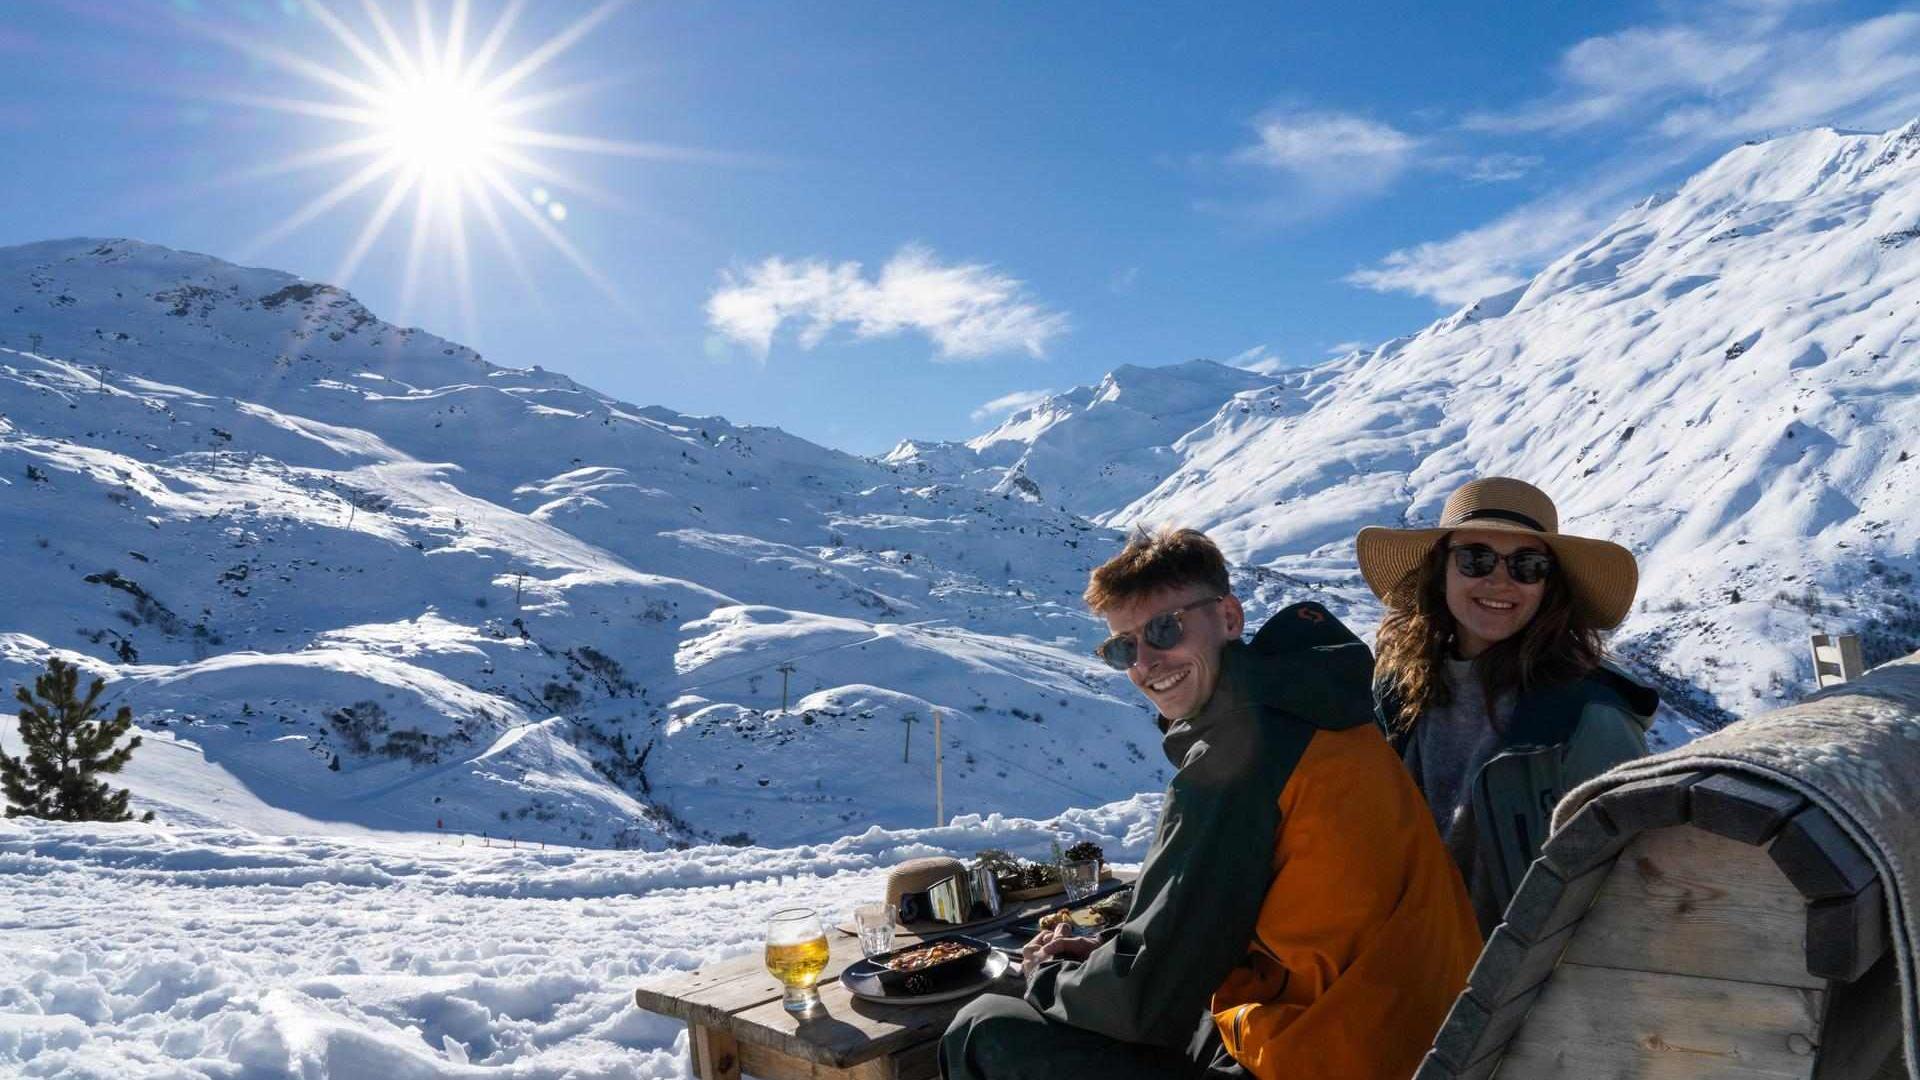 Where to have lunch on the slopes? Our best terraces with views